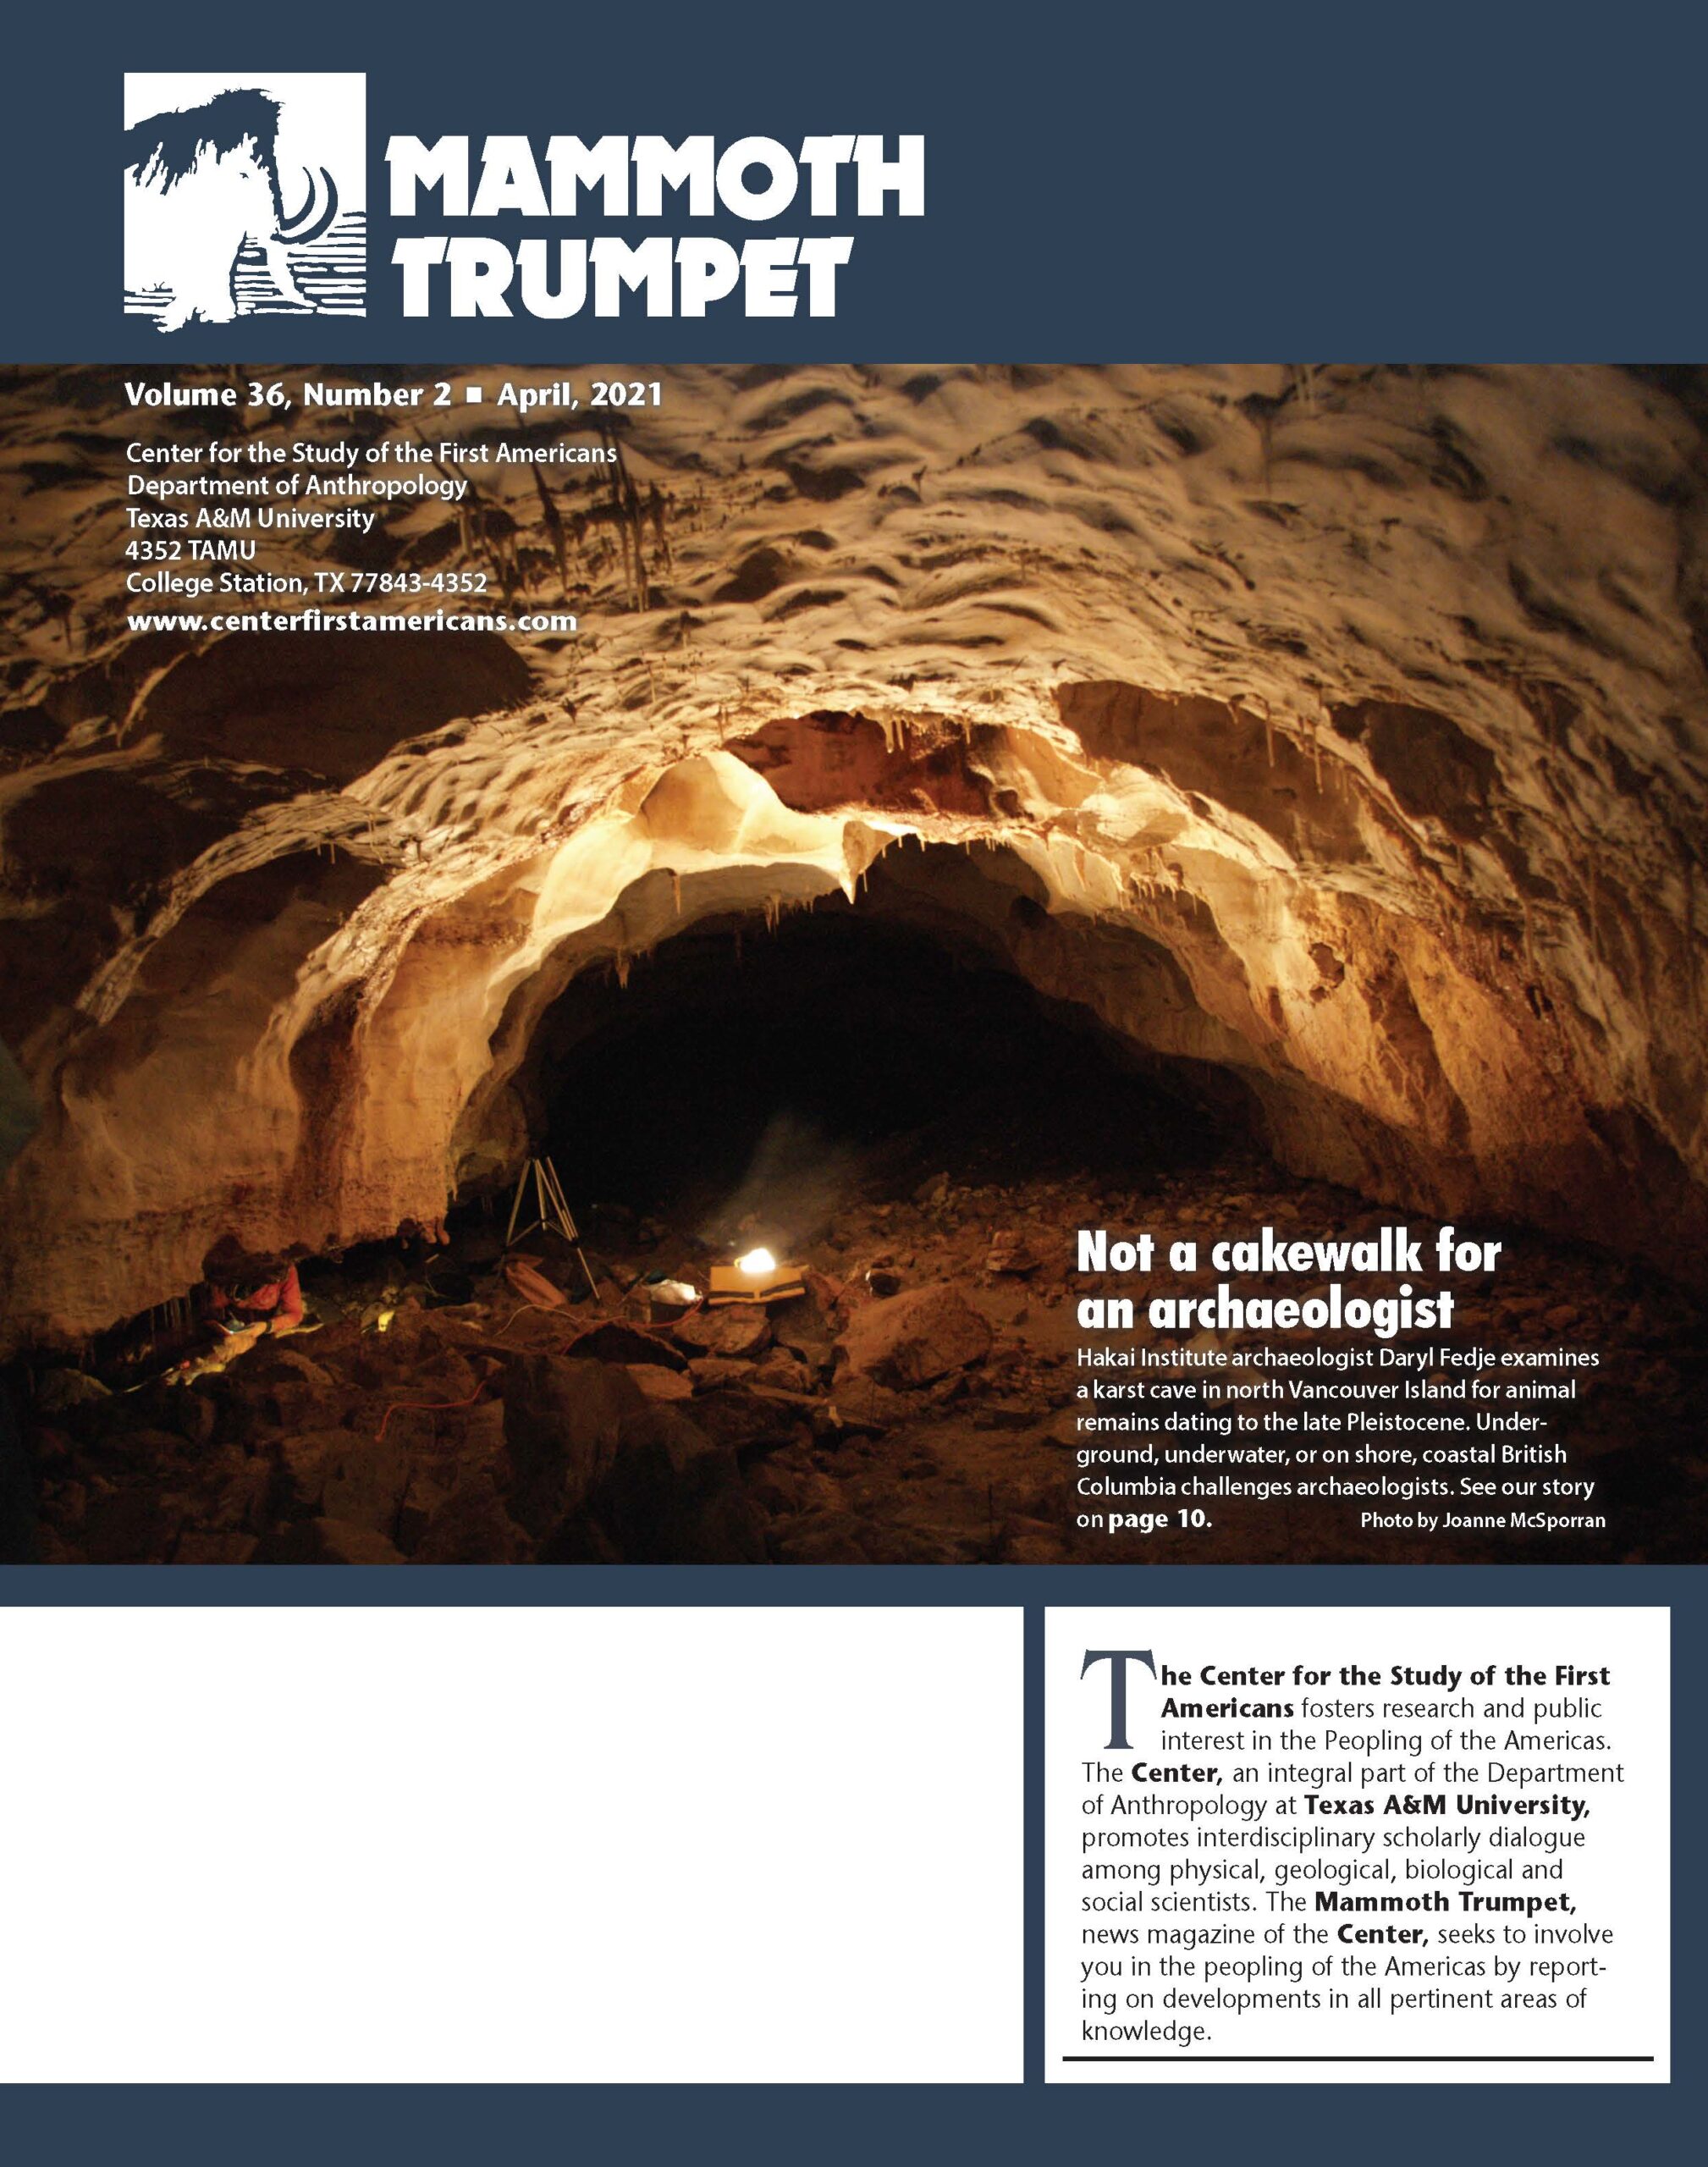 Cover of Mammoth Trumpet April 2021 issue.